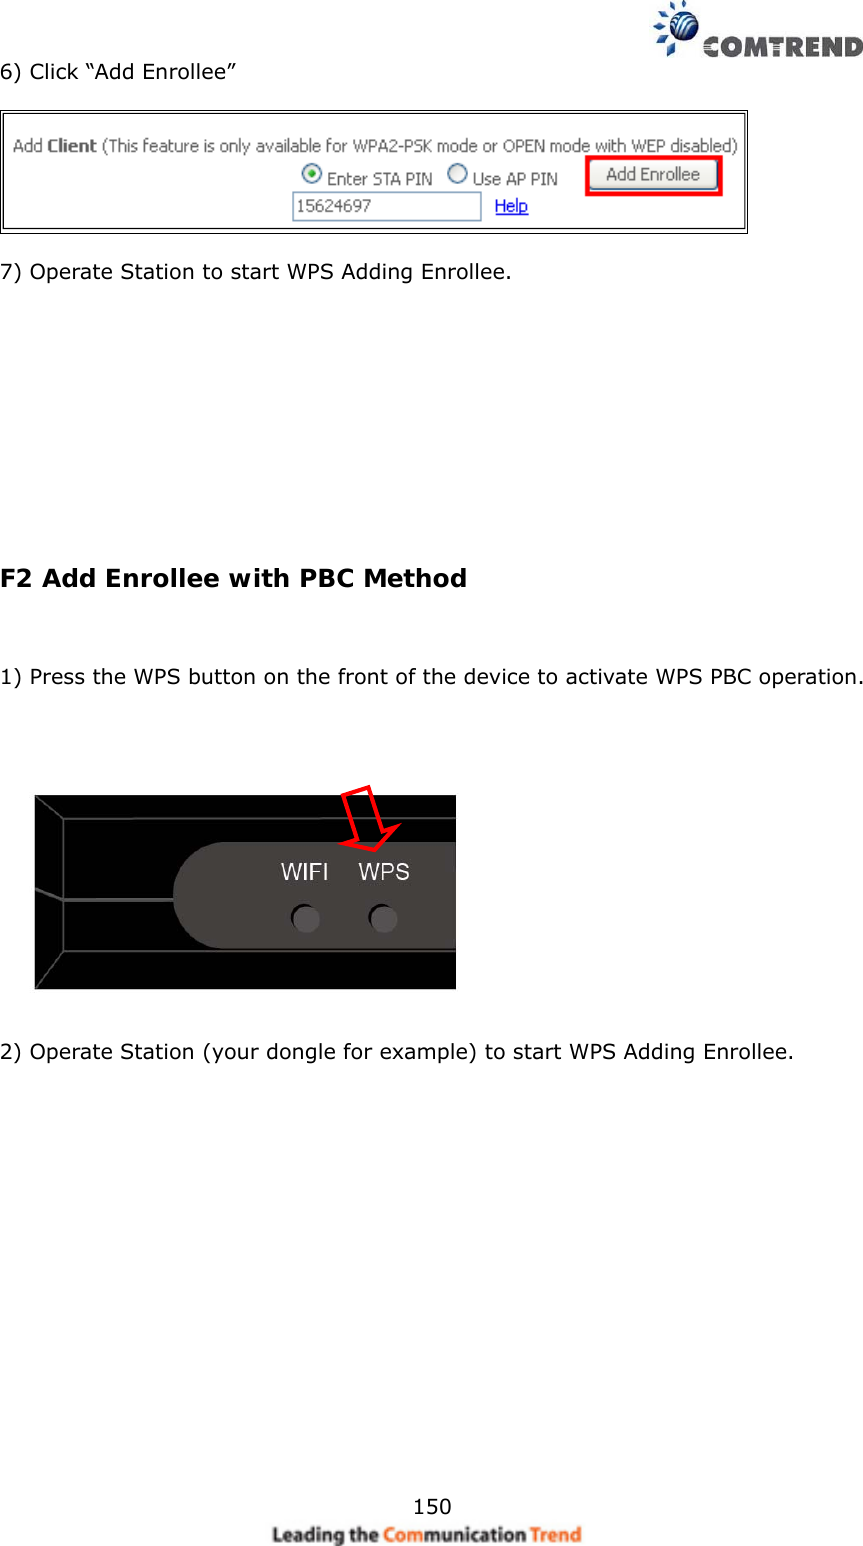    1506) Click “Add Enrollee”    7) Operate Station to start WPS Adding Enrollee.              F2 Add Enrollee with PBC Method   1) Press the WPS button on the front of the device to activate WPS PBC operation.      2) Operate Station (your dongle for example) to start WPS Adding Enrollee.          